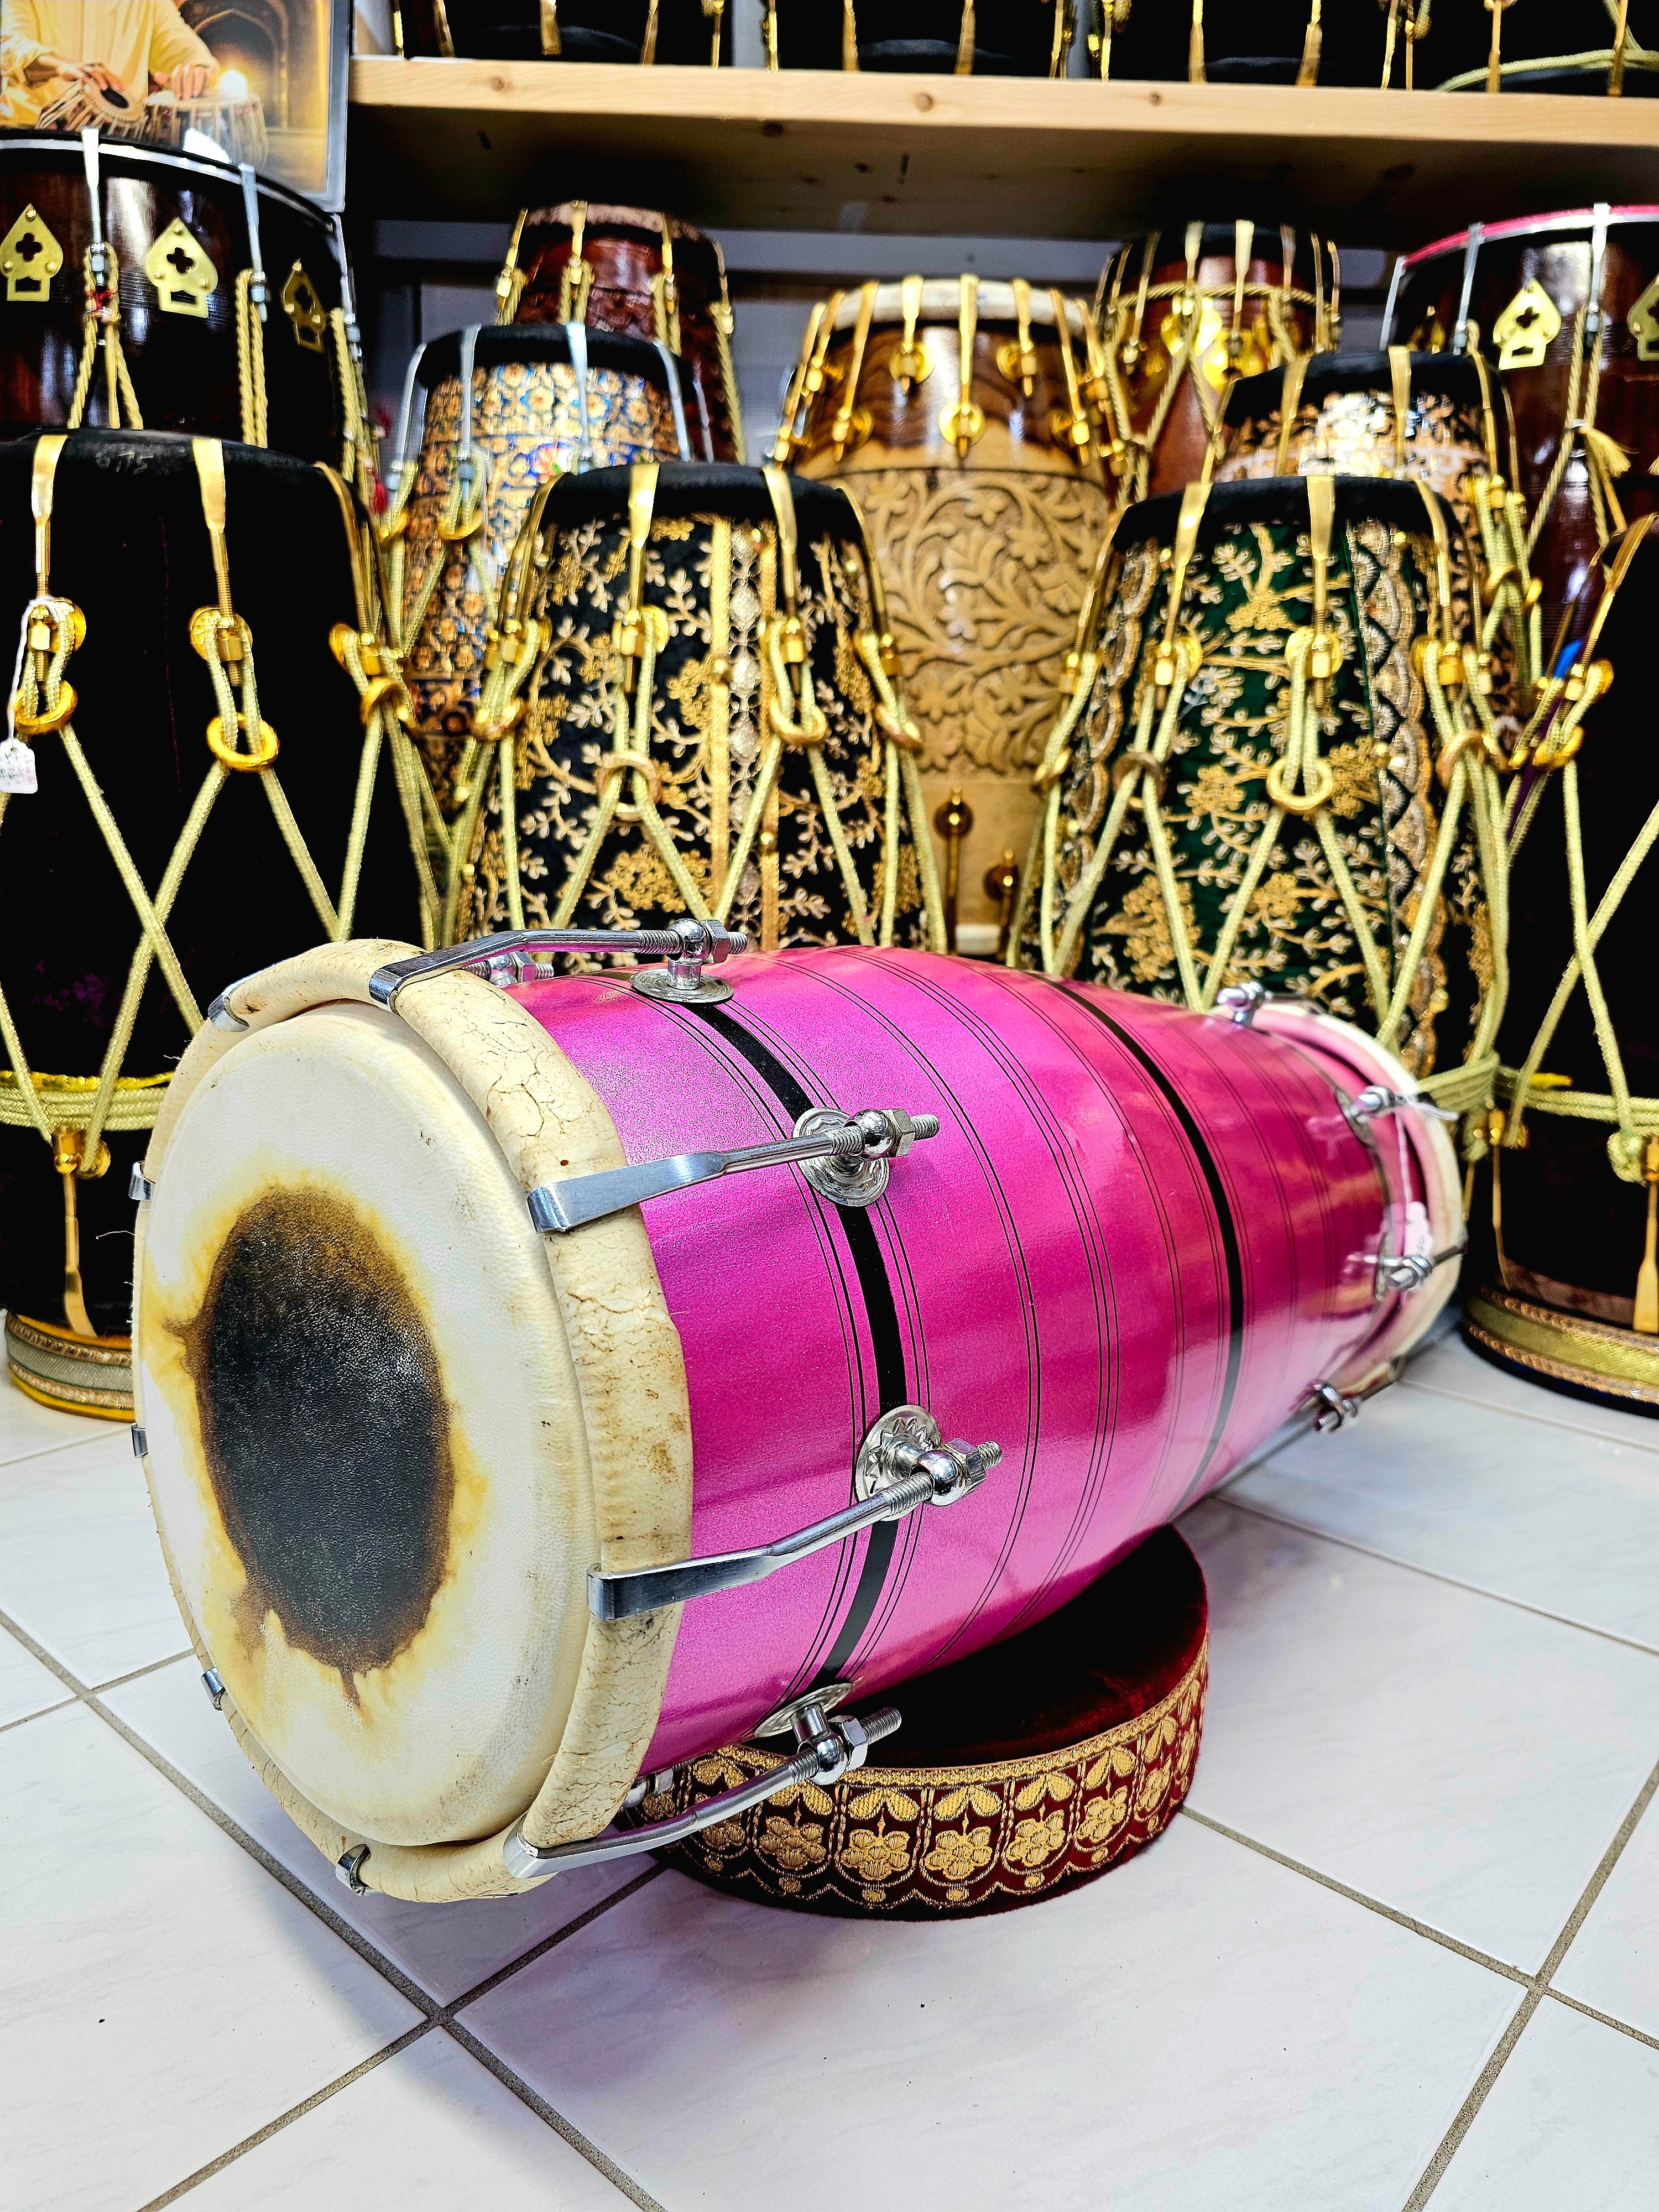 Harmonic Blush: Pink Professional Mango Wood Dholak with Black Stripes, Minor Cosmetic Defects, and Artfully Repaired Crack *Clearance Sale*